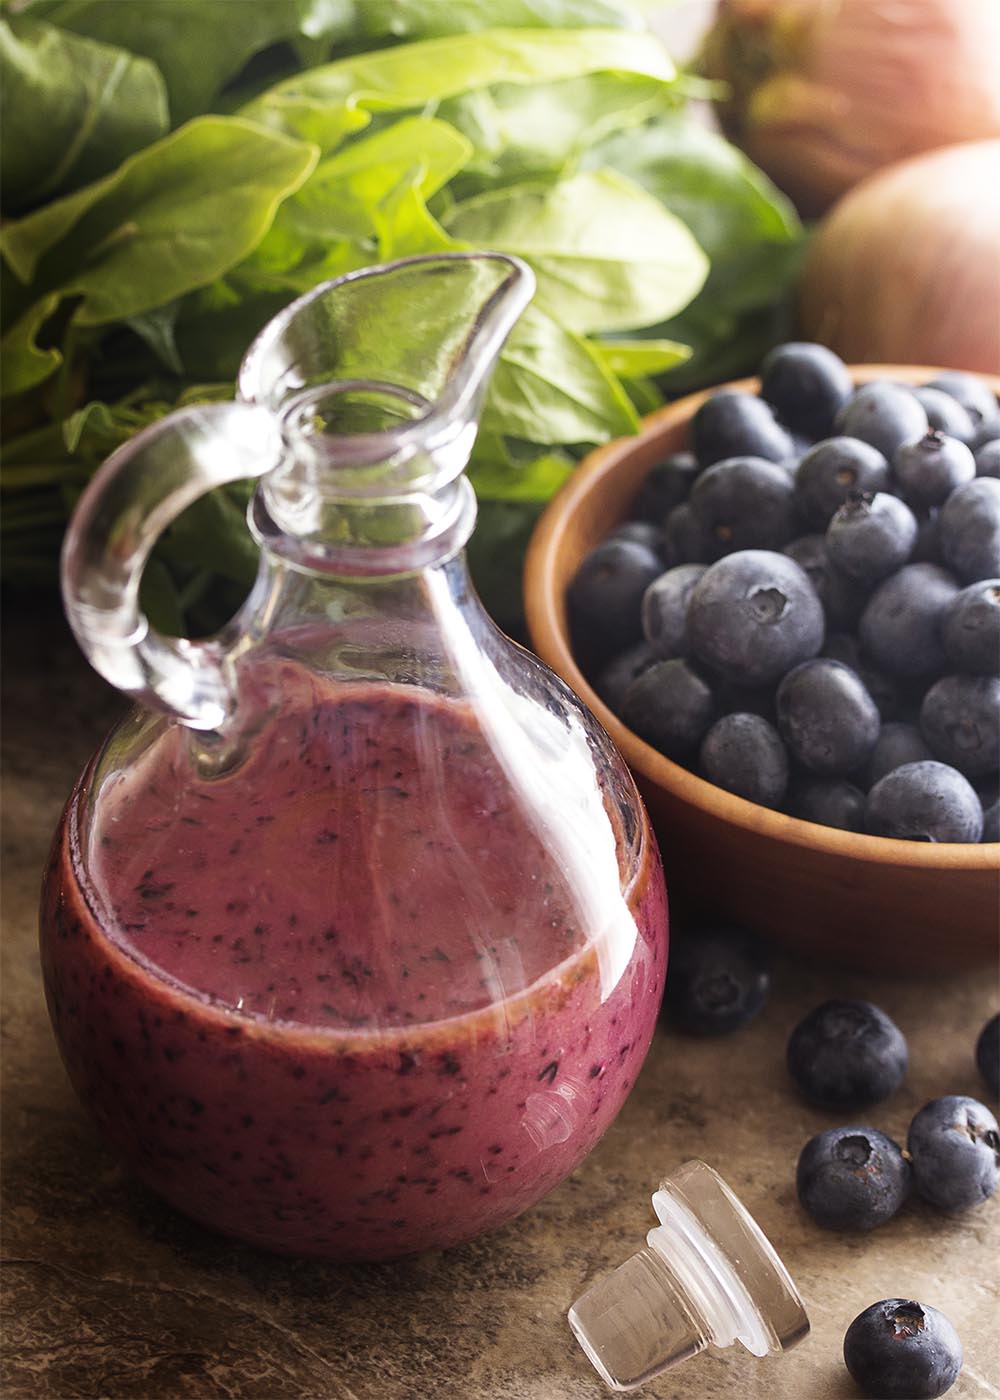 It's time to make a fruity summer salad dressing! Quickly puree up fresh blueberries into a spicy, sweet, and tangy blueberry vinaigrette. | justalittlebitofbacon.com